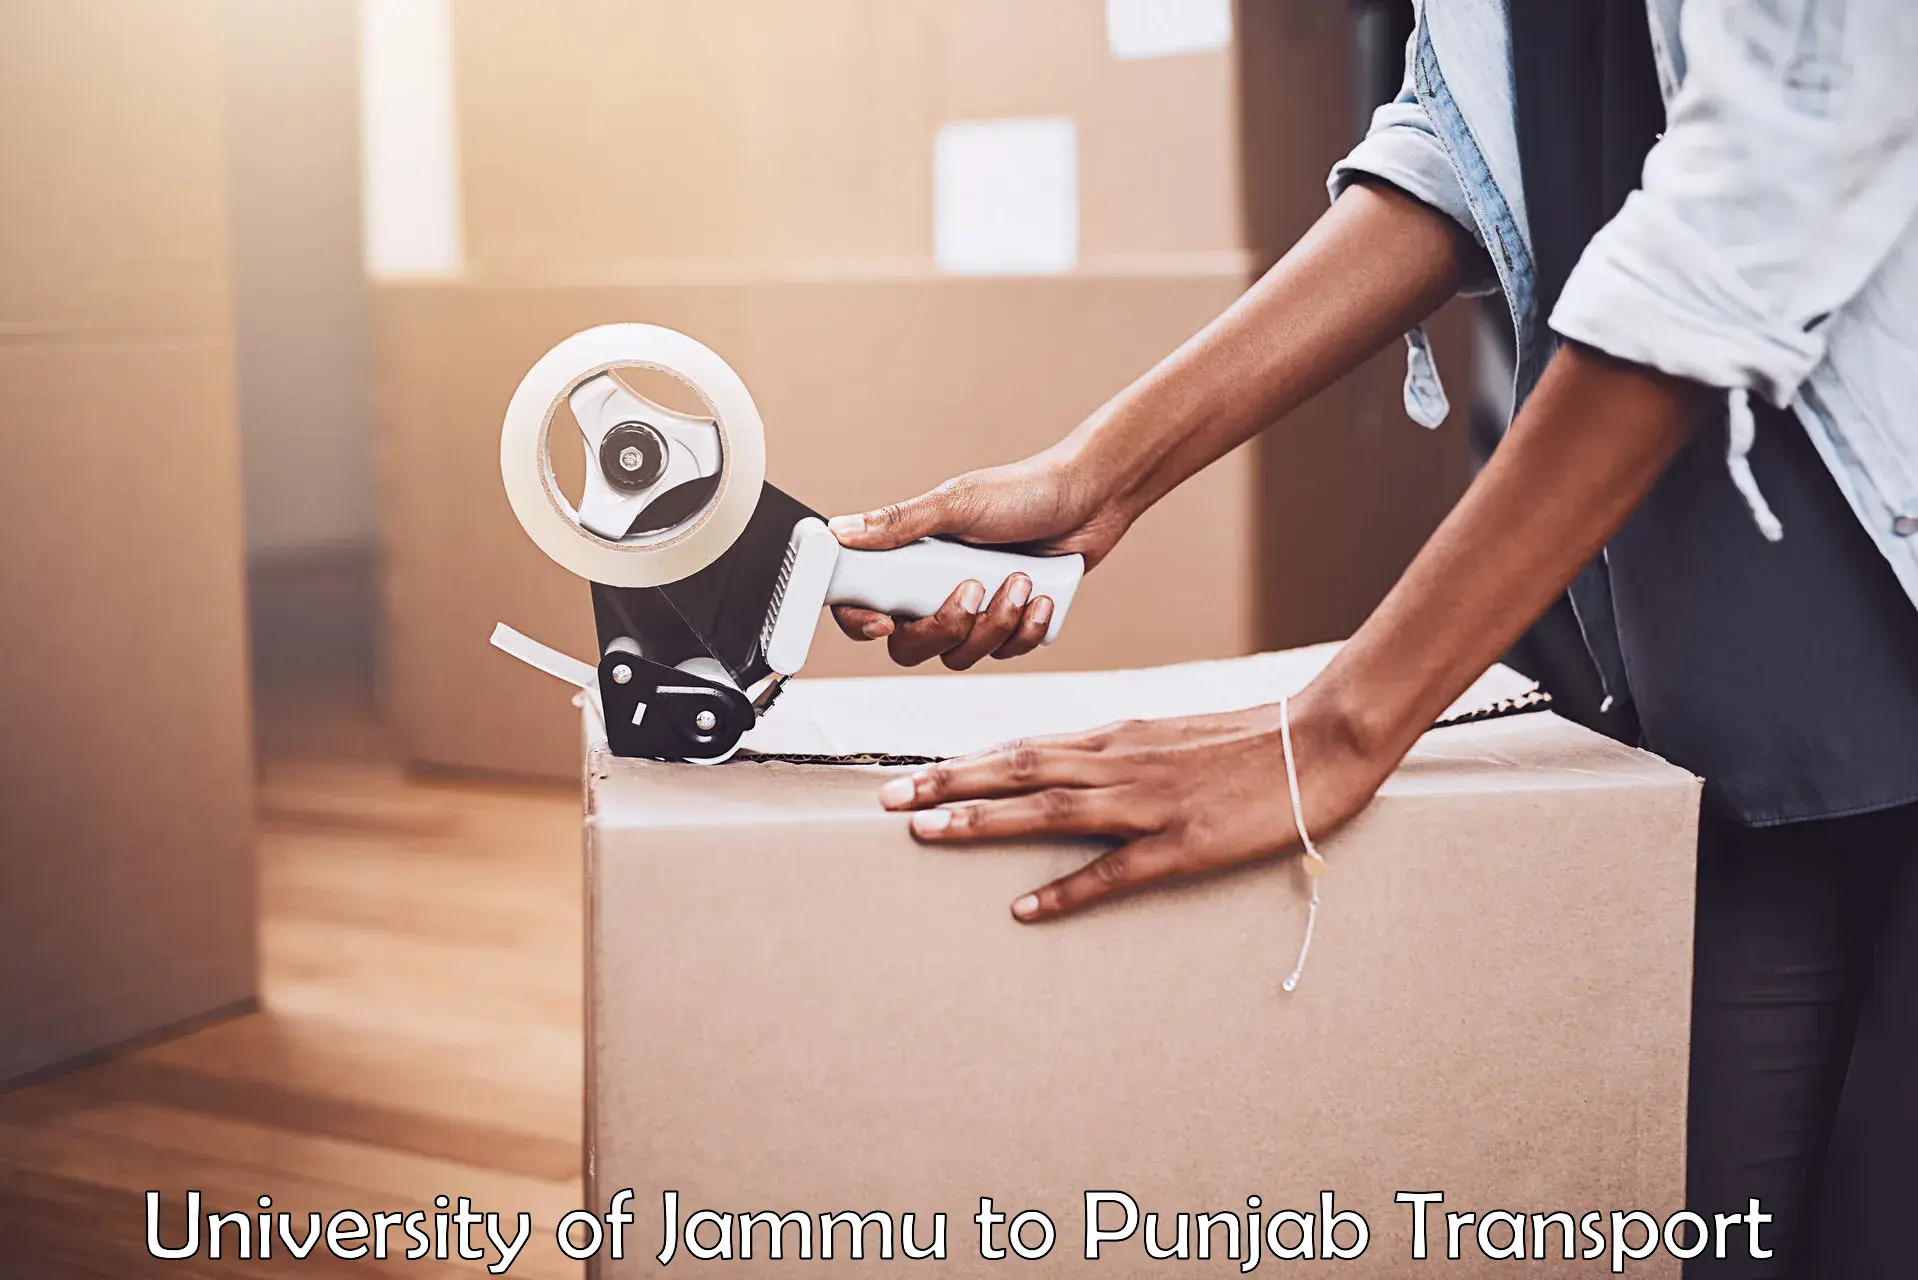 Express transport services in University of Jammu to Amritsar